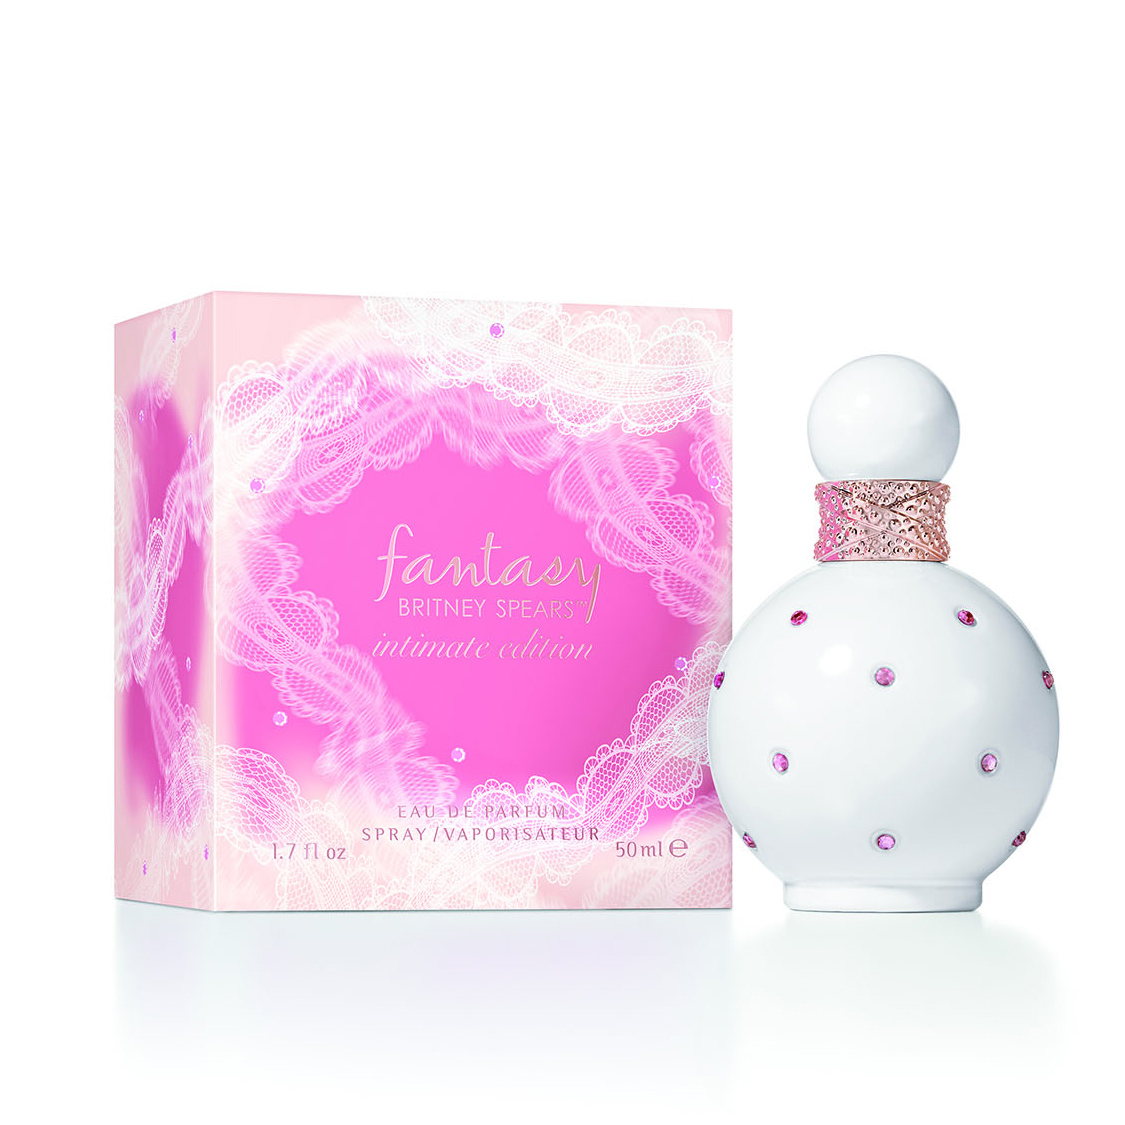 Review: Britney Spears Fantasy Intimate Edition Perfume